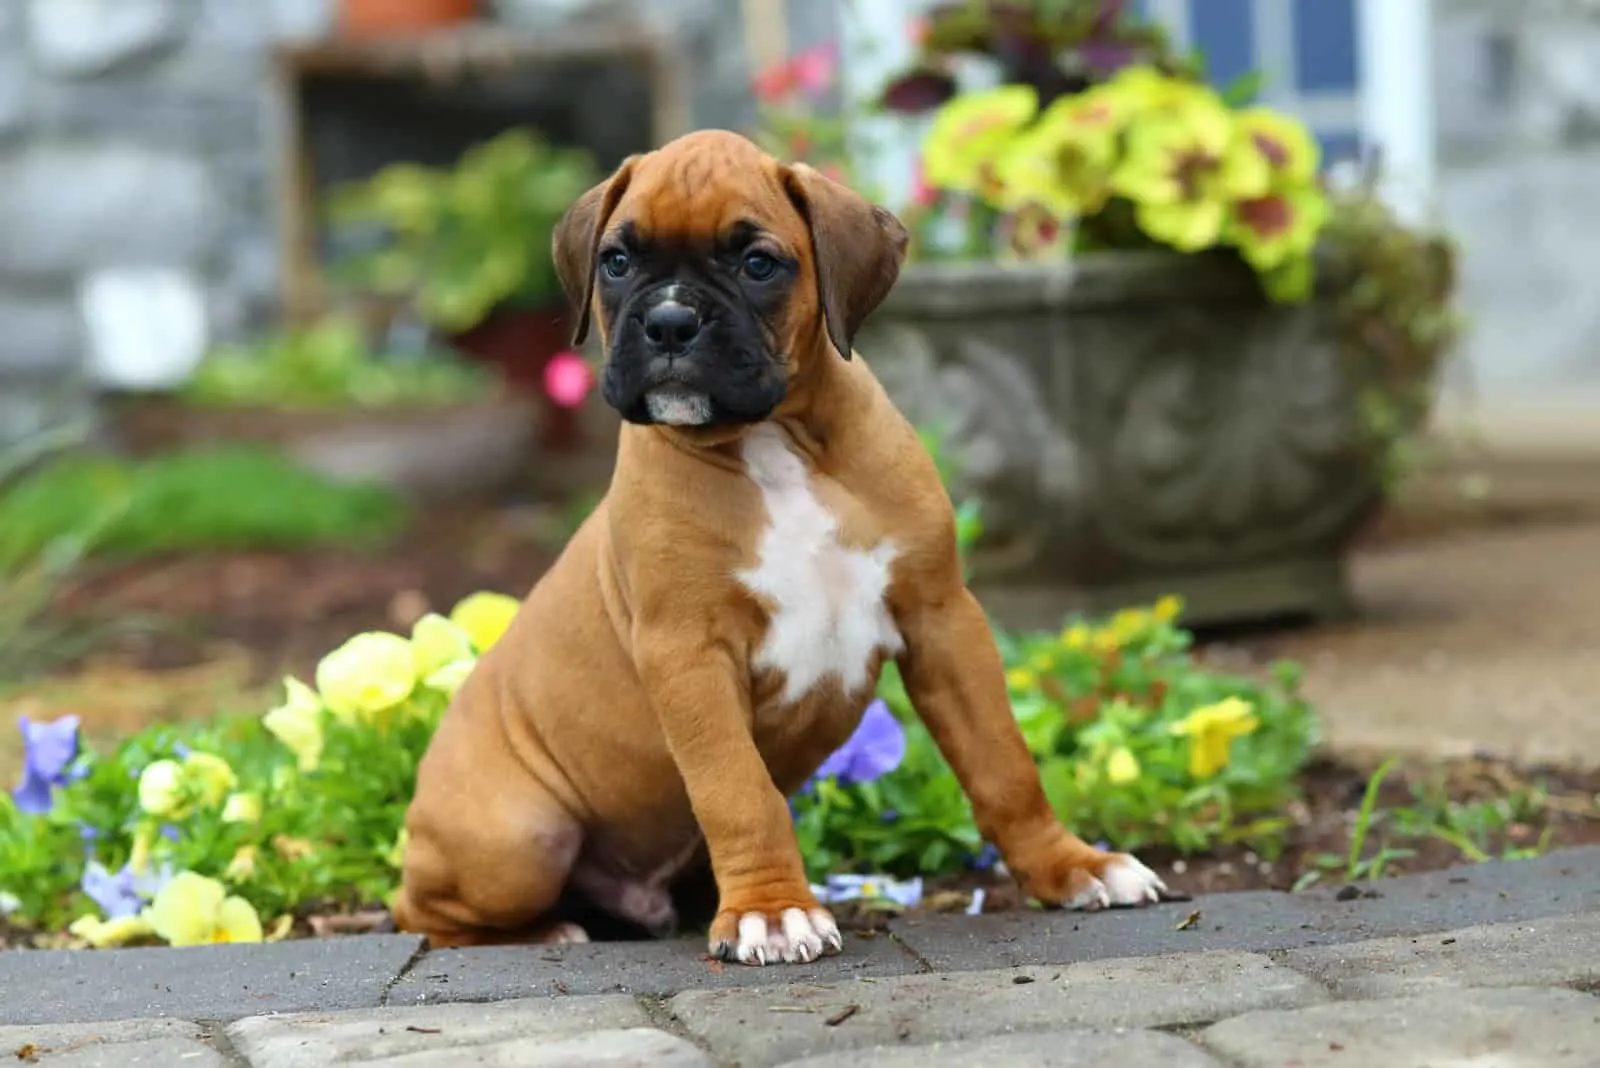 A Boxer puppy sits on a stone path